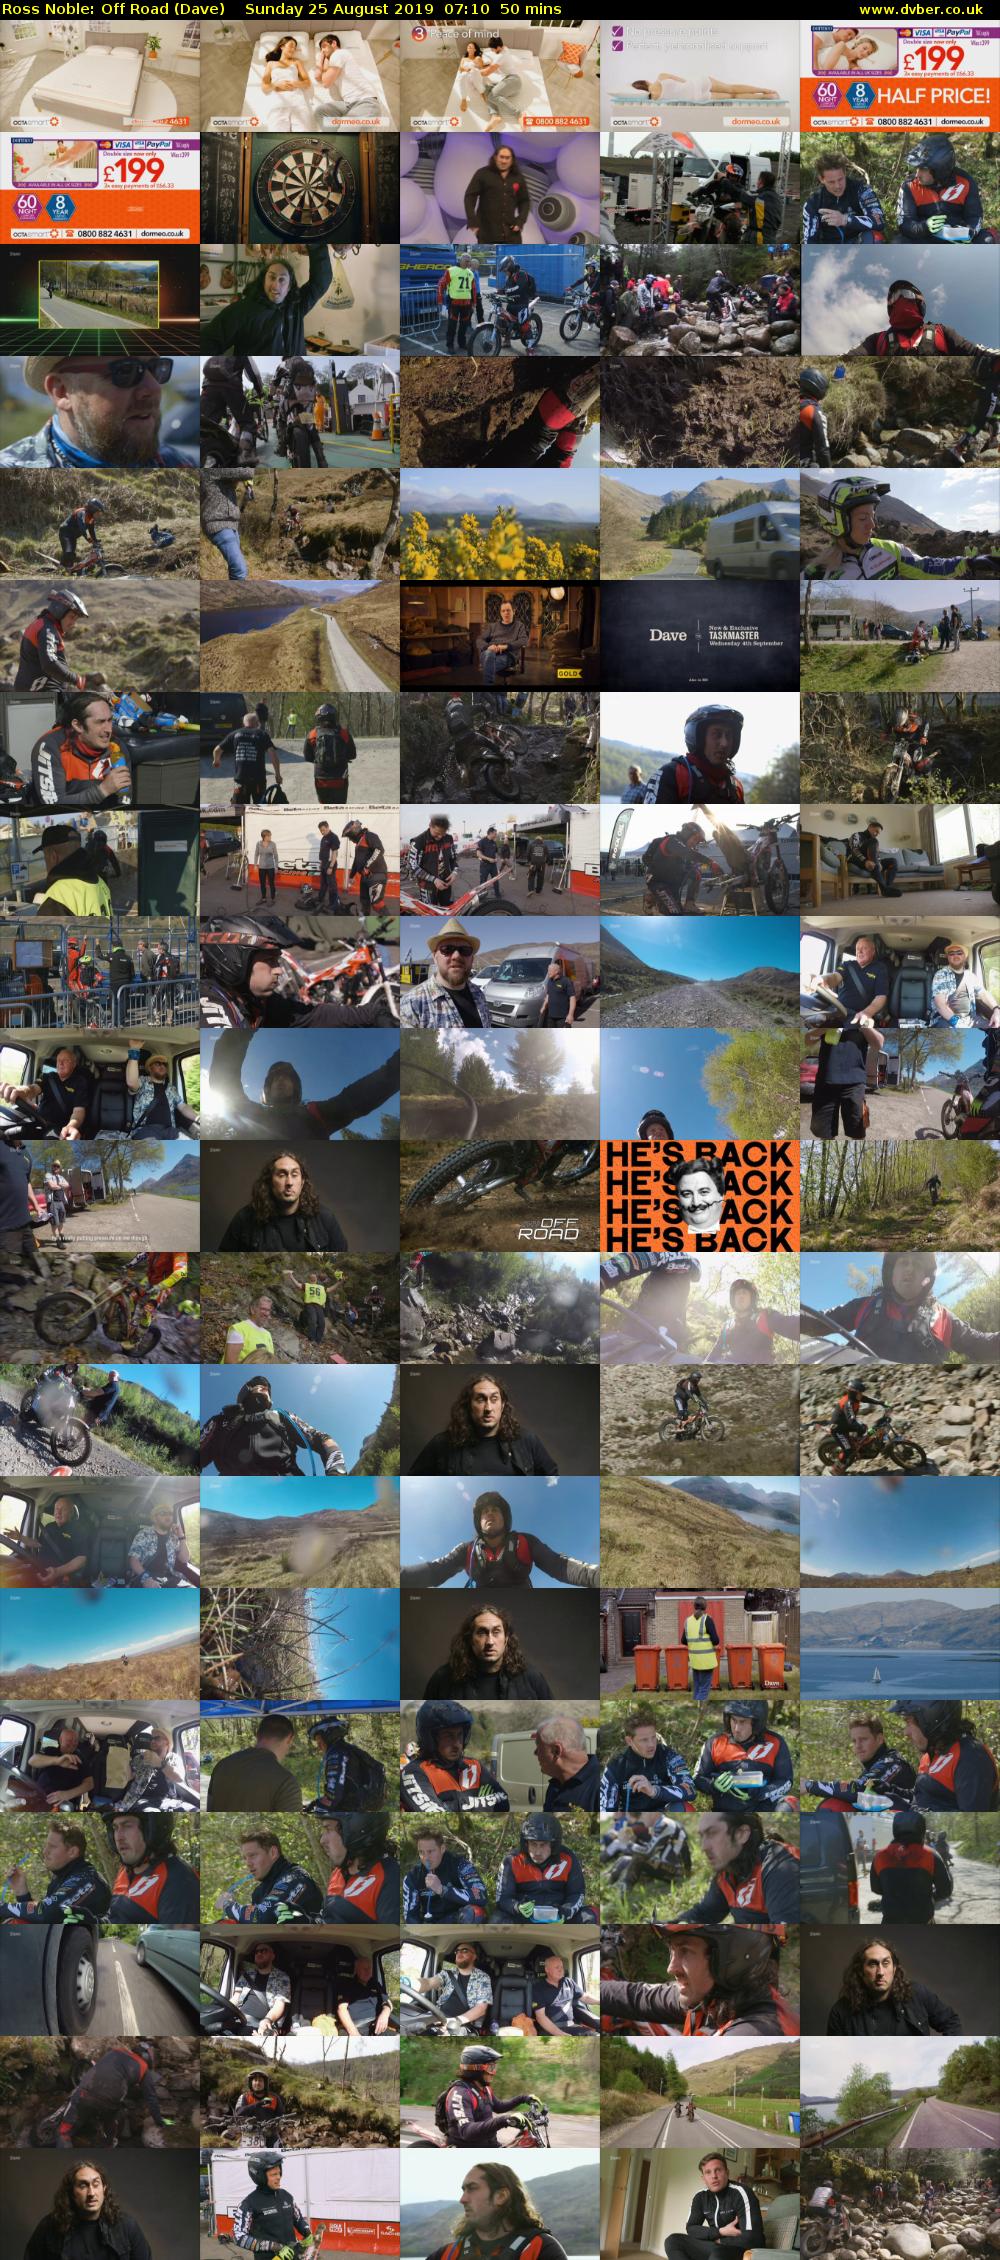 Ross Noble: Off Road (Dave) Sunday 25 August 2019 07:10 - 08:00